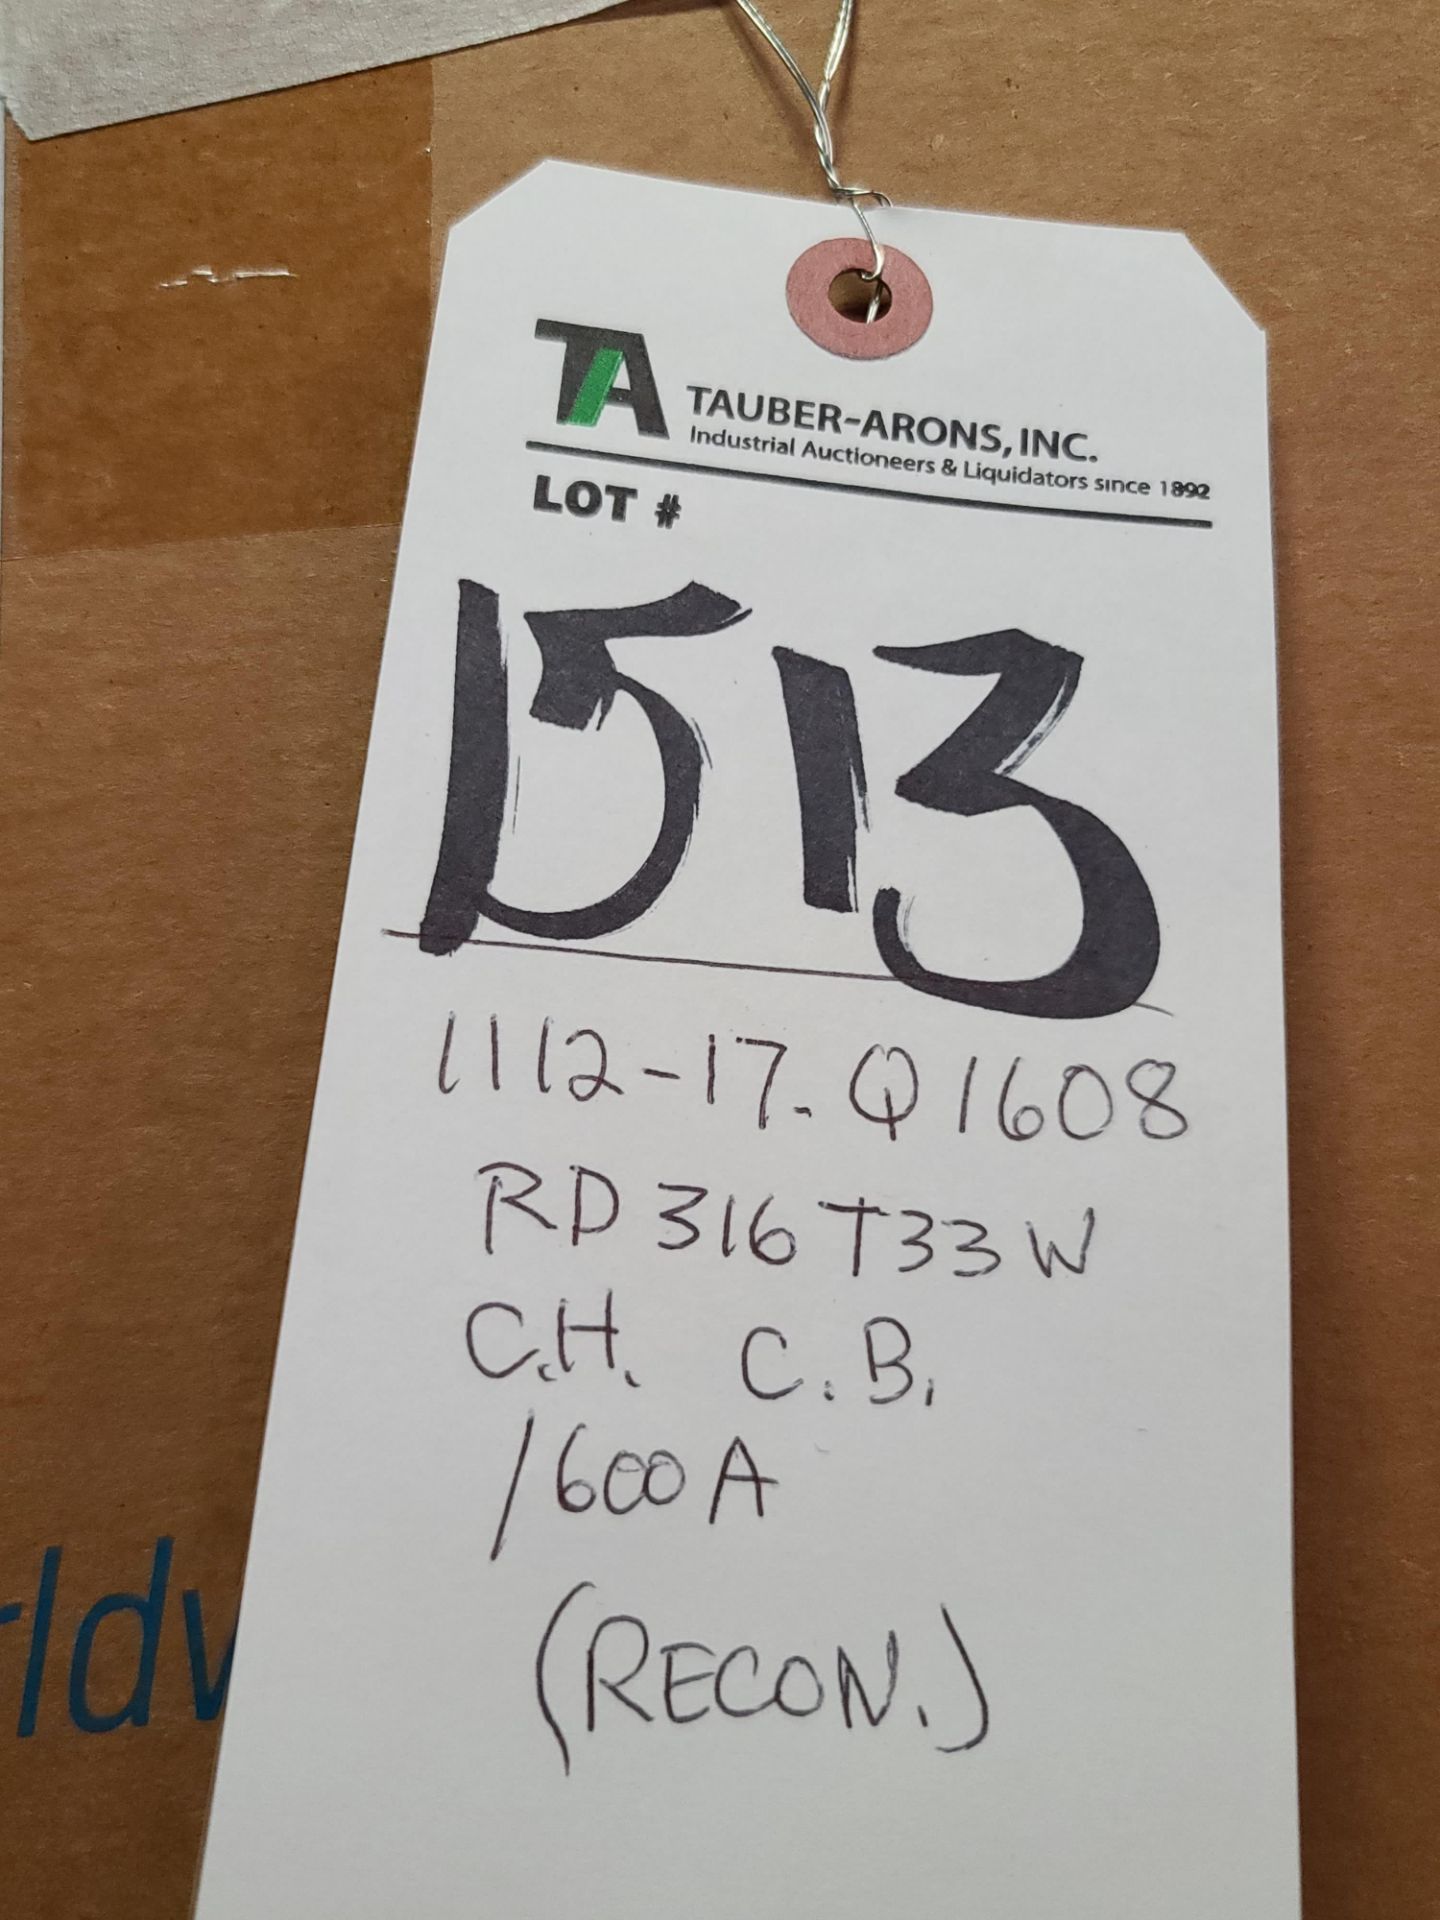 (Lot) CH mod. RD316T33W Circuit Breaker, 1600A 1112-17-Q1008 (Reconditioned) (LOADING FEES: $20) - Image 2 of 2